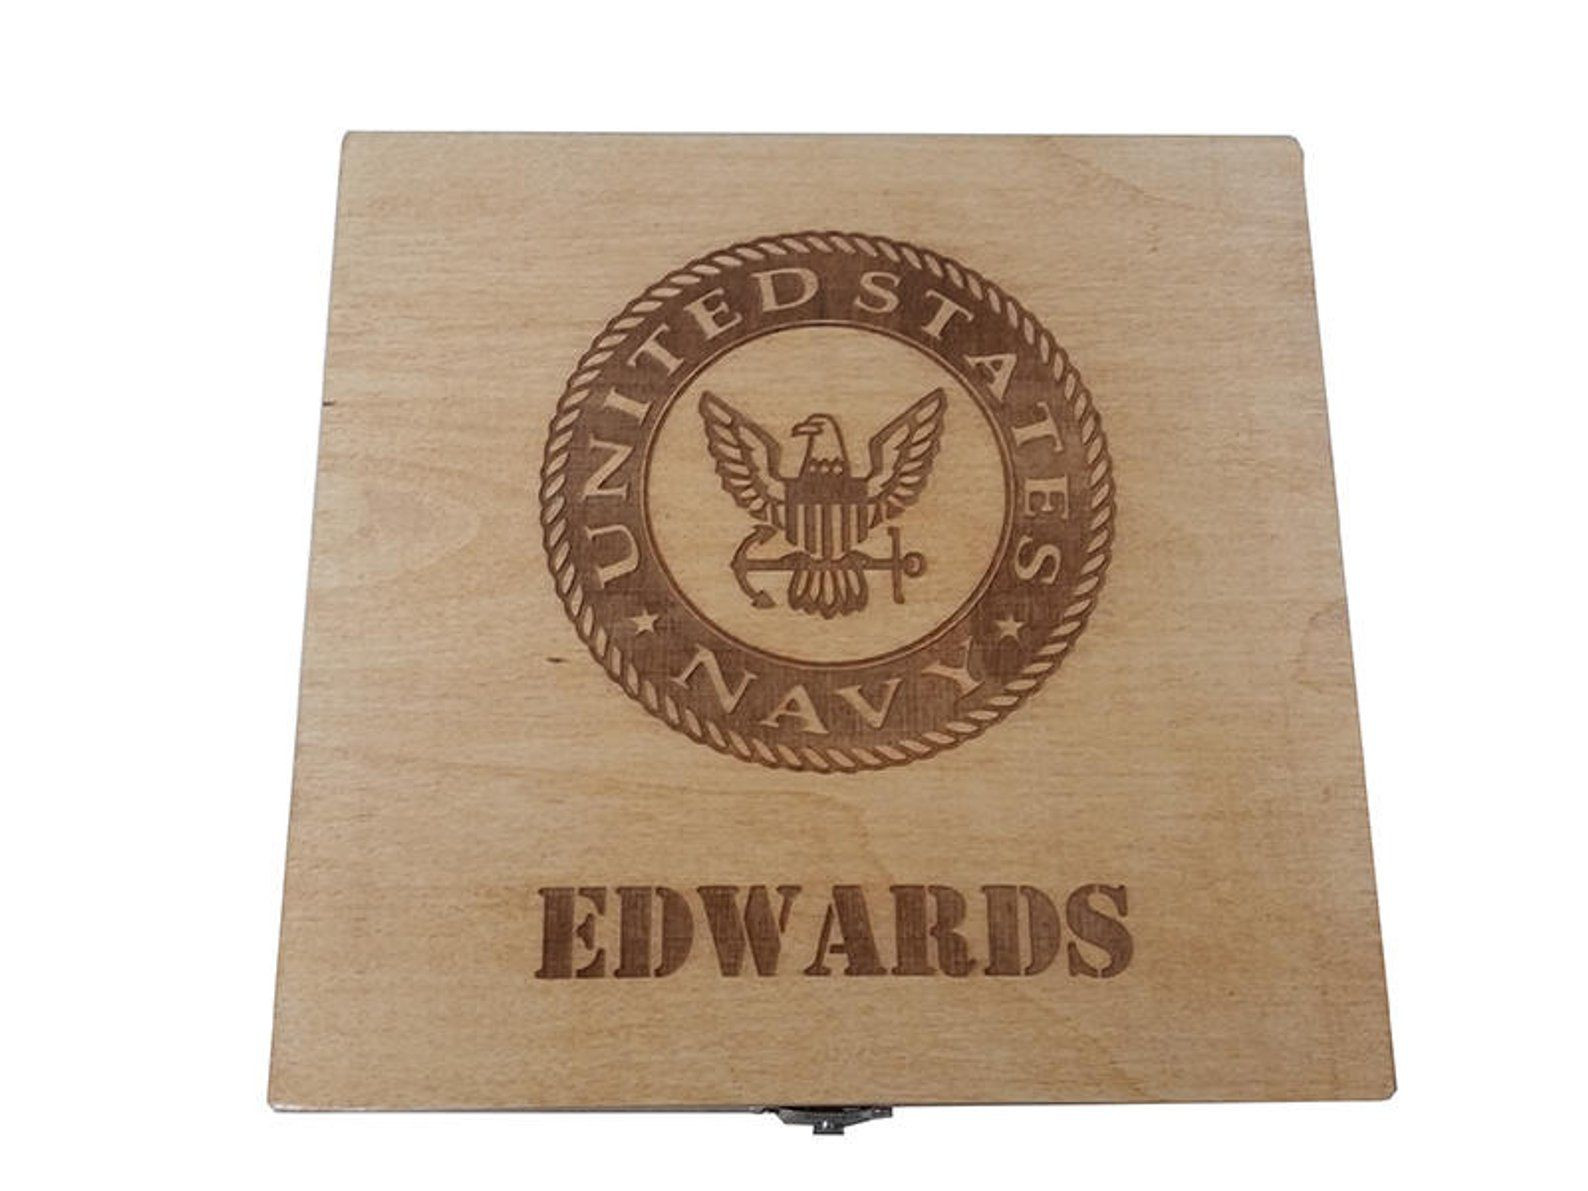 Gift Ideas For Navy Boot Camp Graduation
 Personalized US Navy Keepsake Box Boot camp graduation